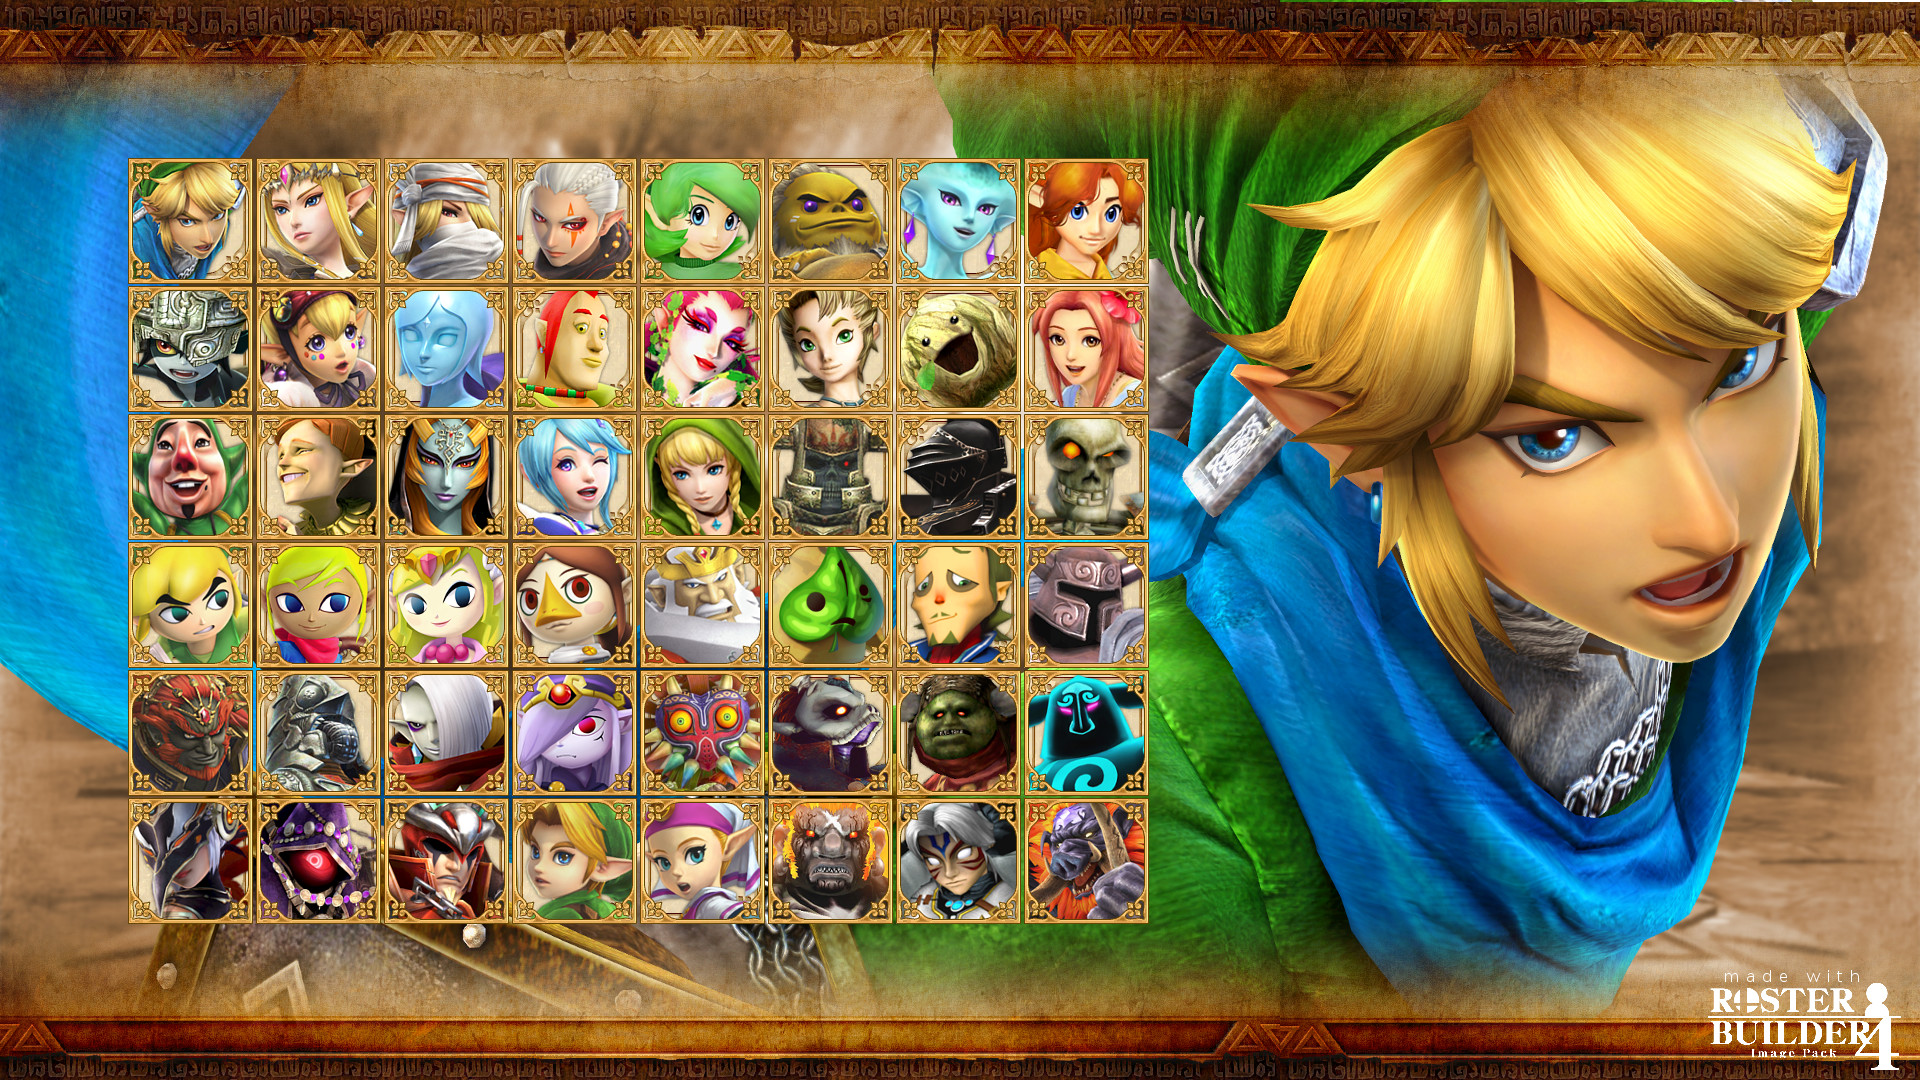 1920x1080 ... ROSTER BUILDER 4 Image Pack - Hyrule Warriors CSS! by ConnorRentz